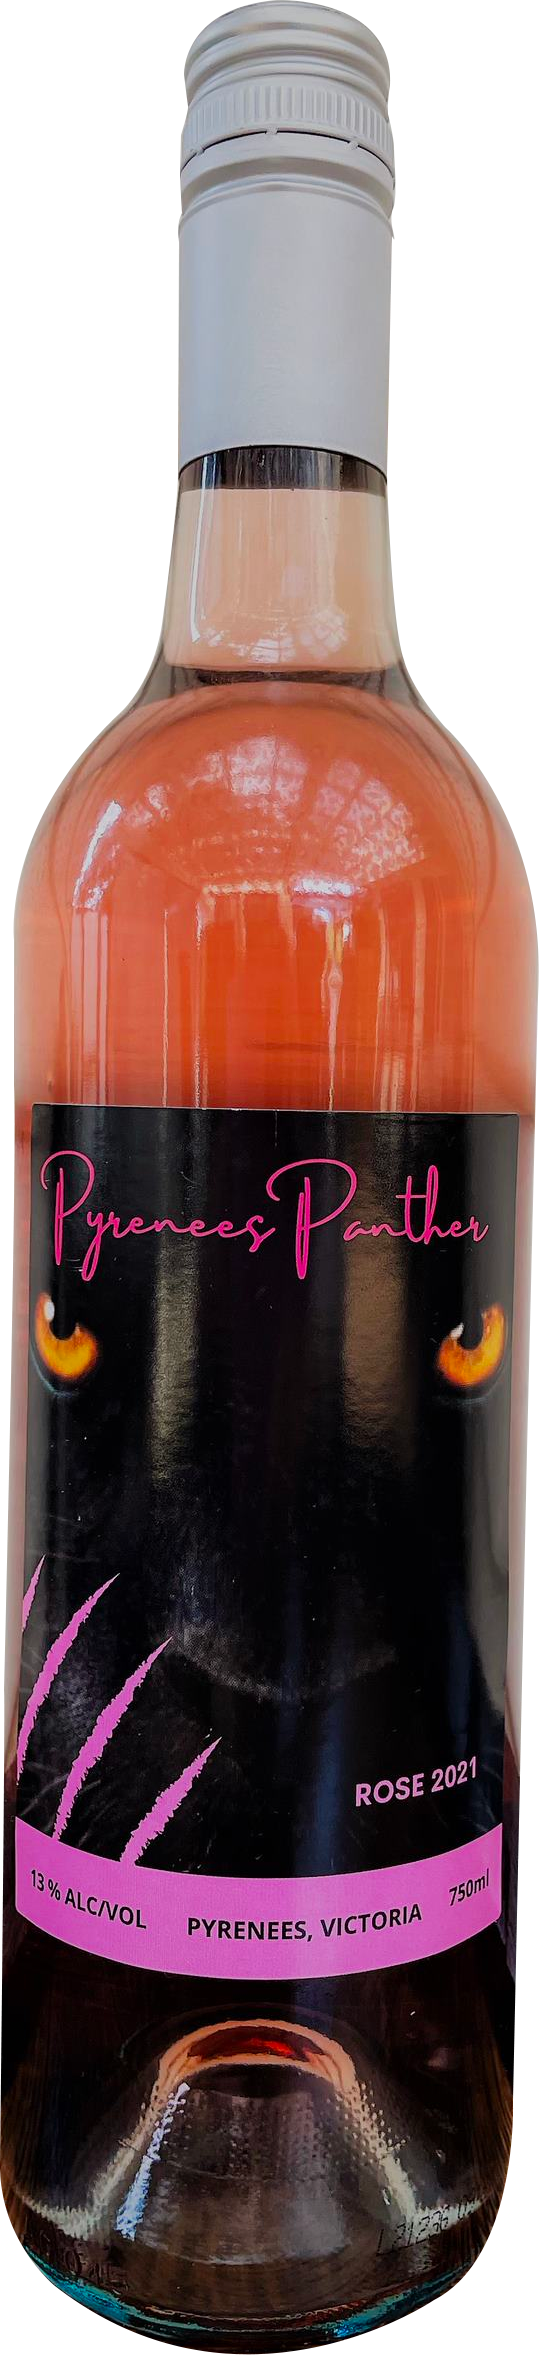 Pyrenees Panther-Rose 2021-        WHOLESALE ONLY (Contact us for a quote)